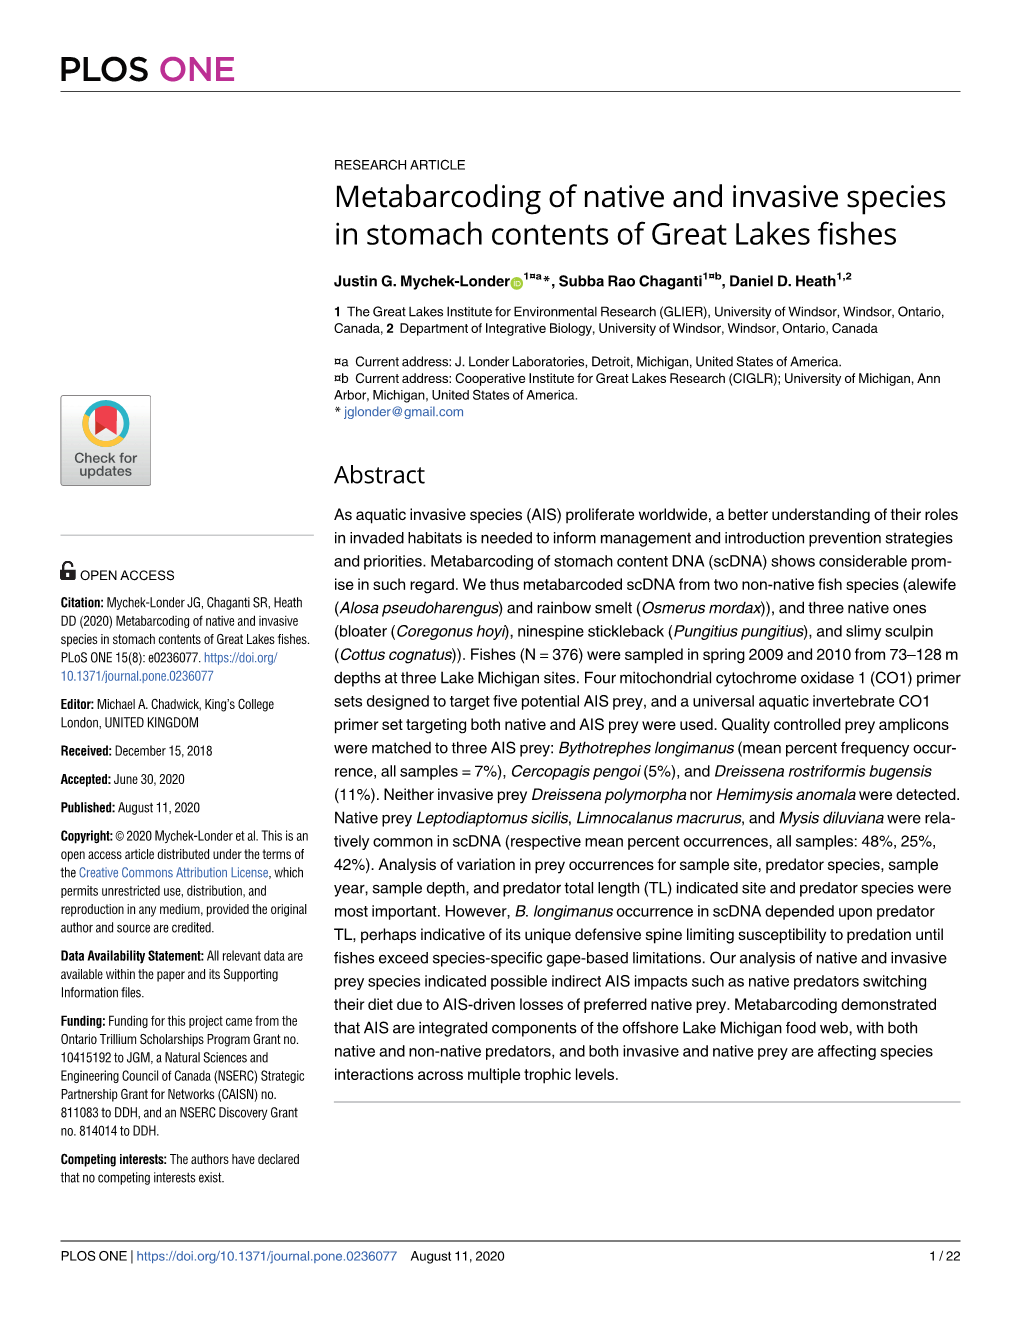 Metabarcoding of Native and Invasive Species in Stomach Contents of Great Lakes Fishes